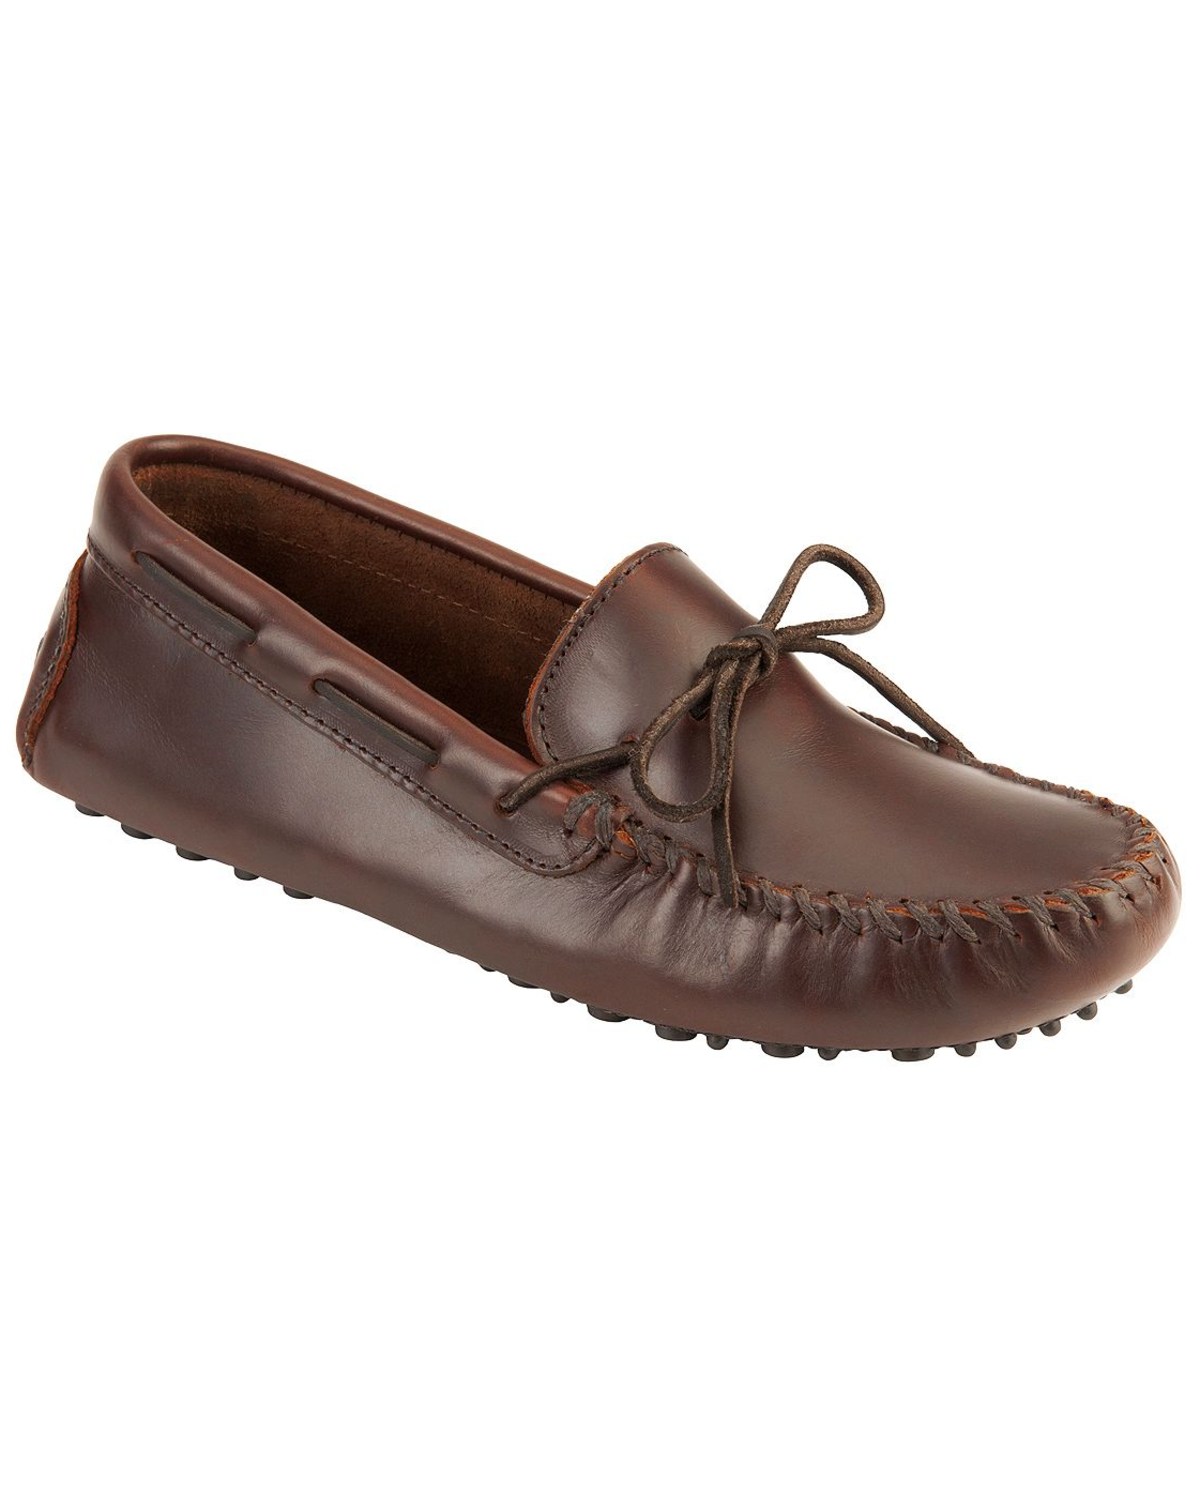 moccasin driving shoes